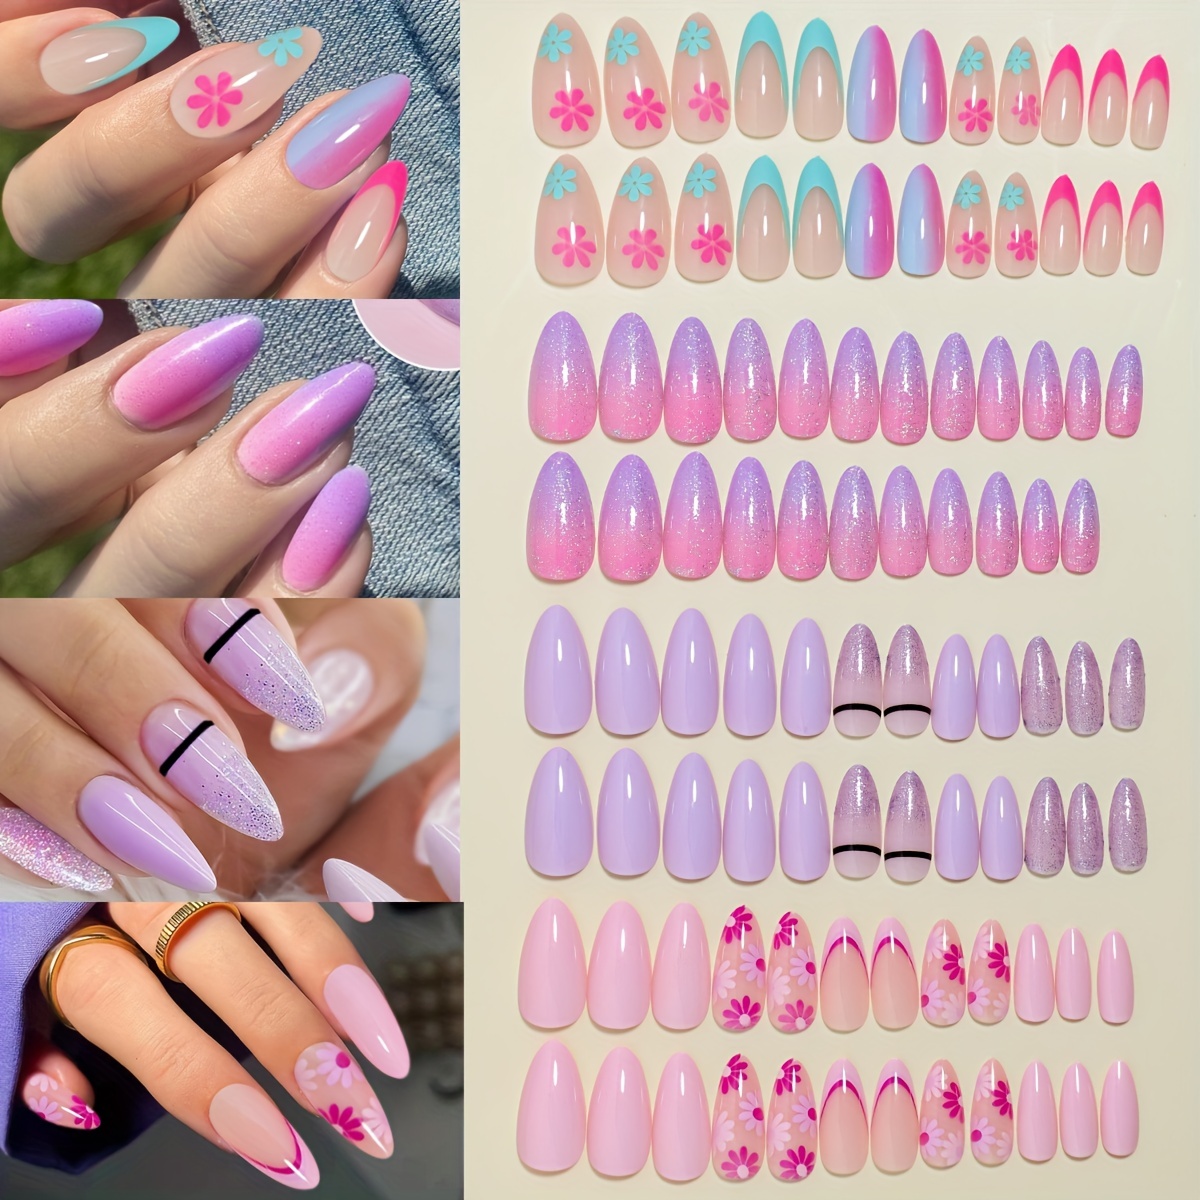 

4 Packs (96 Pcs) Pink Purple Press On Nails, Gradient False Nails With Cute Flower Design, Mixed Colorful Fake Nails Long Almond Glue On Nails Set With Adhesive Tabs Nail File For Women